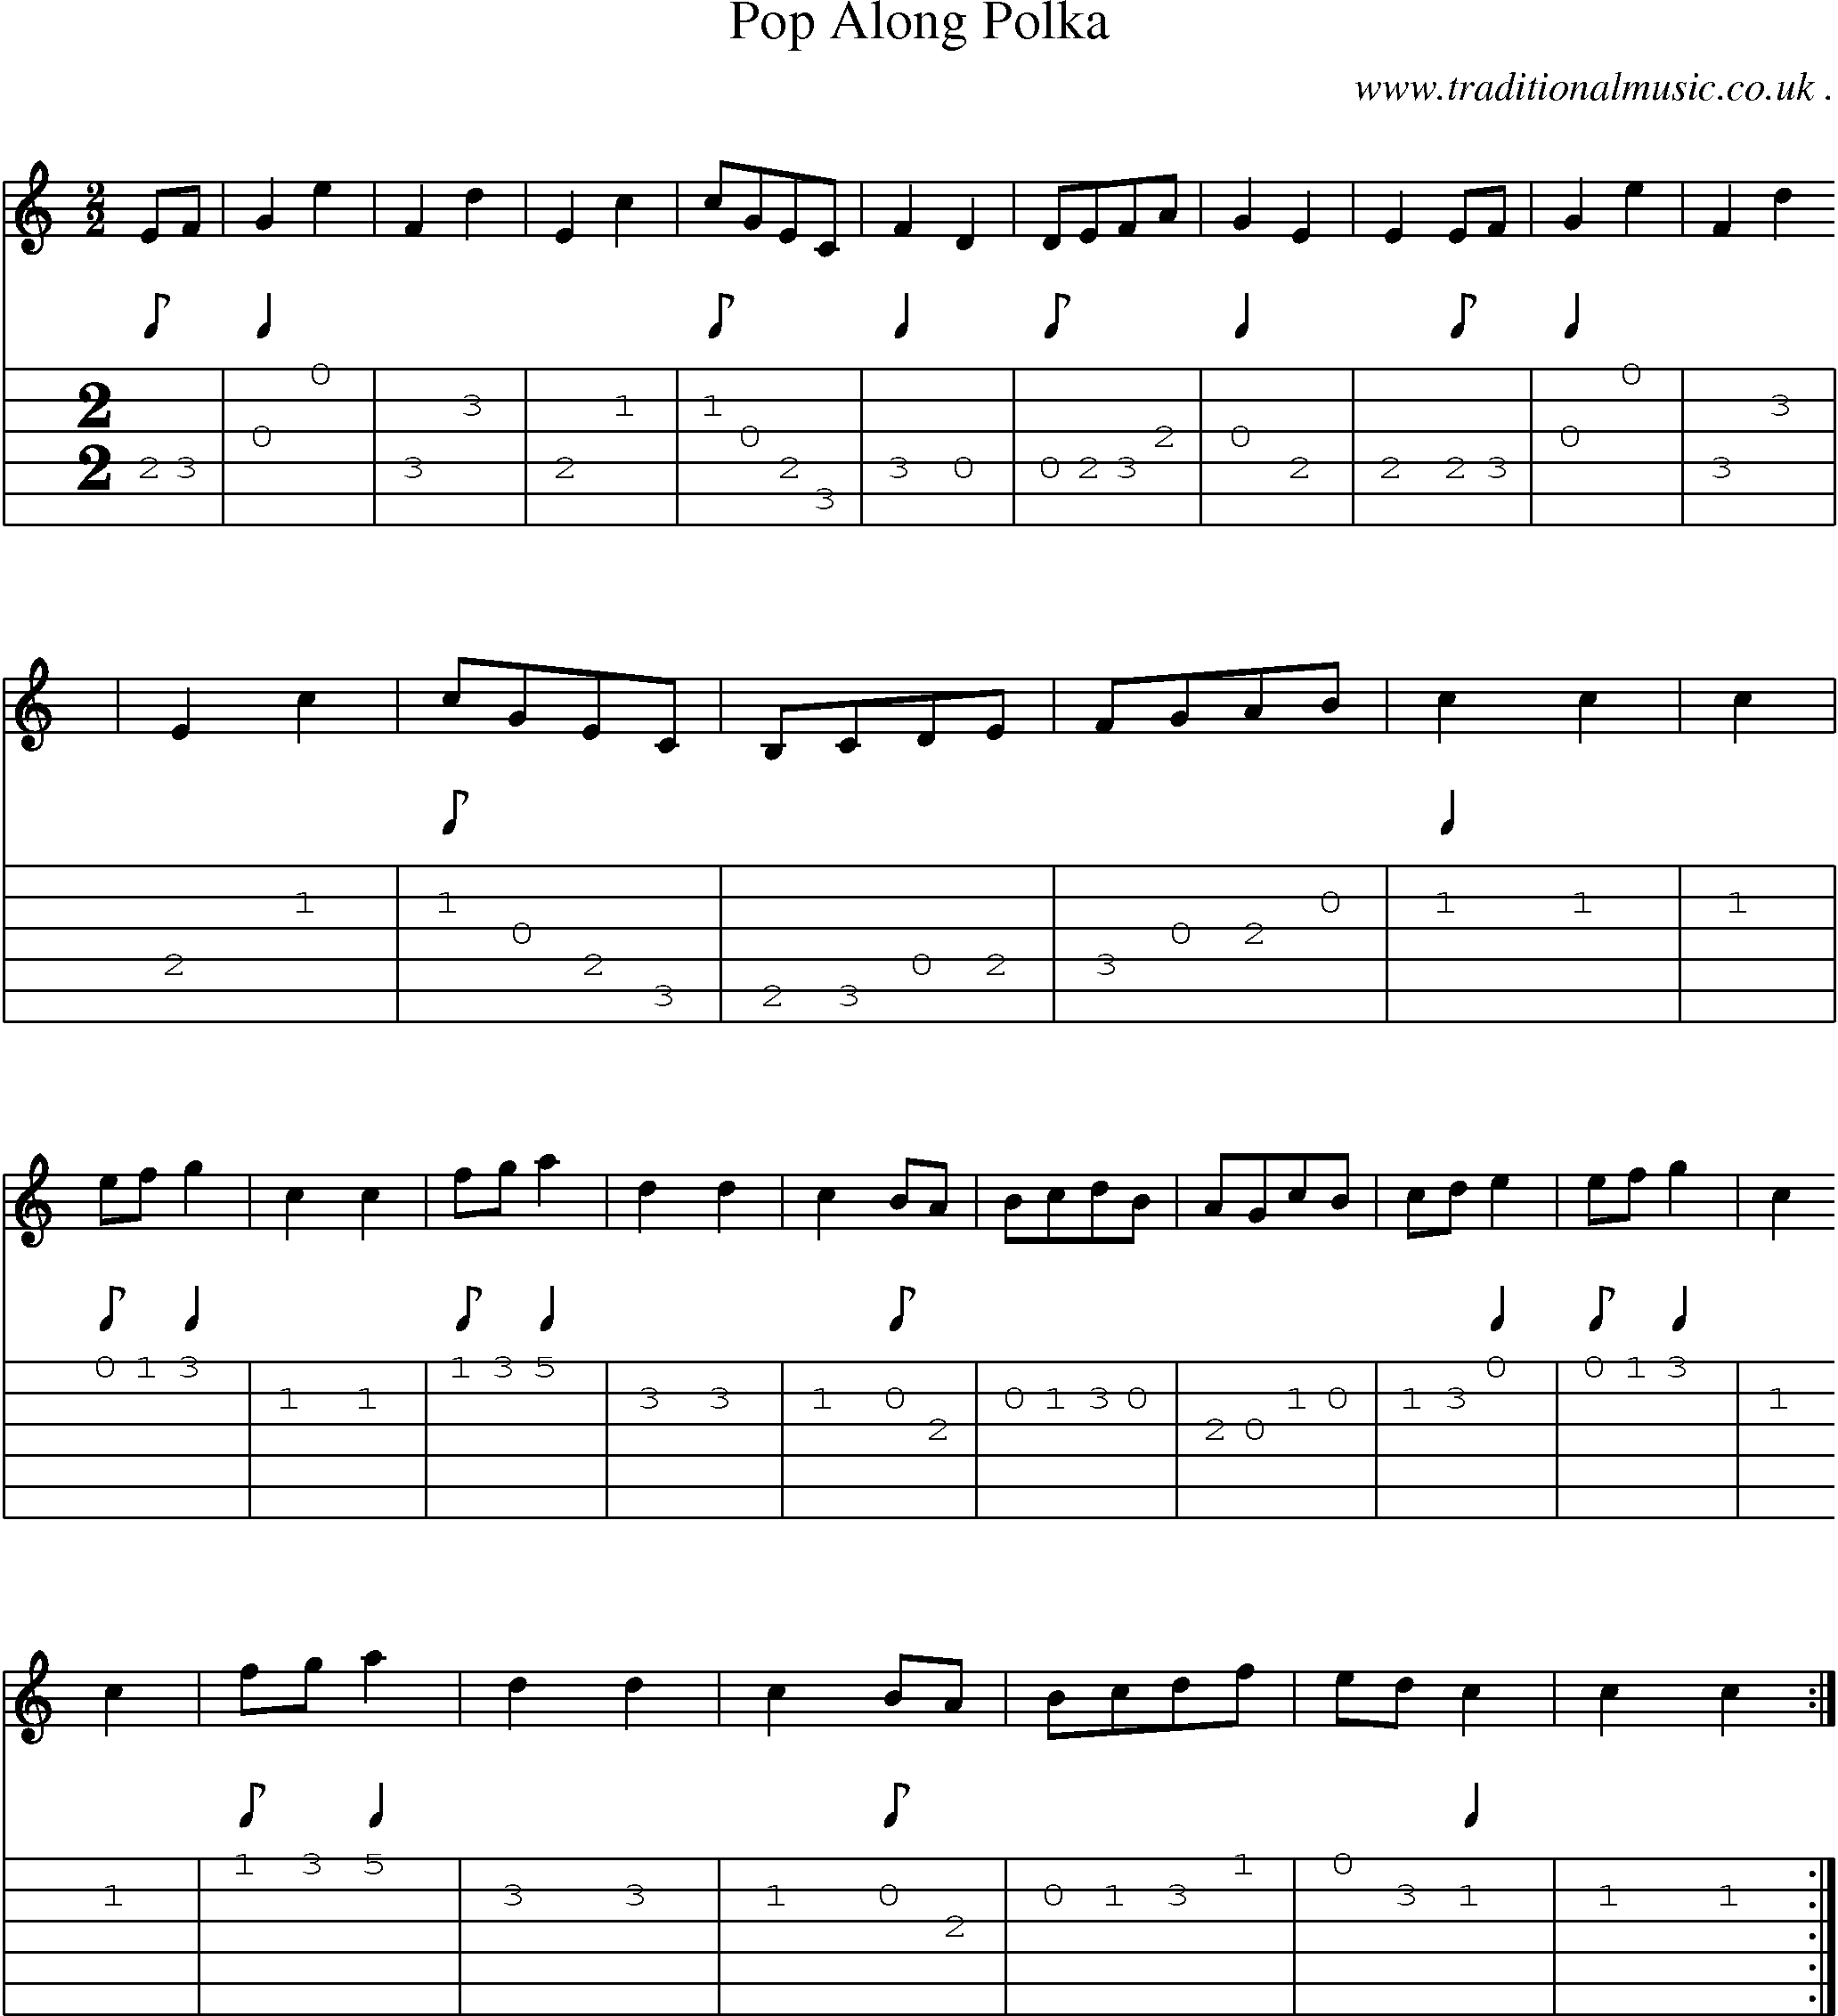 Sheet-Music and Guitar Tabs for Pop Along Polka